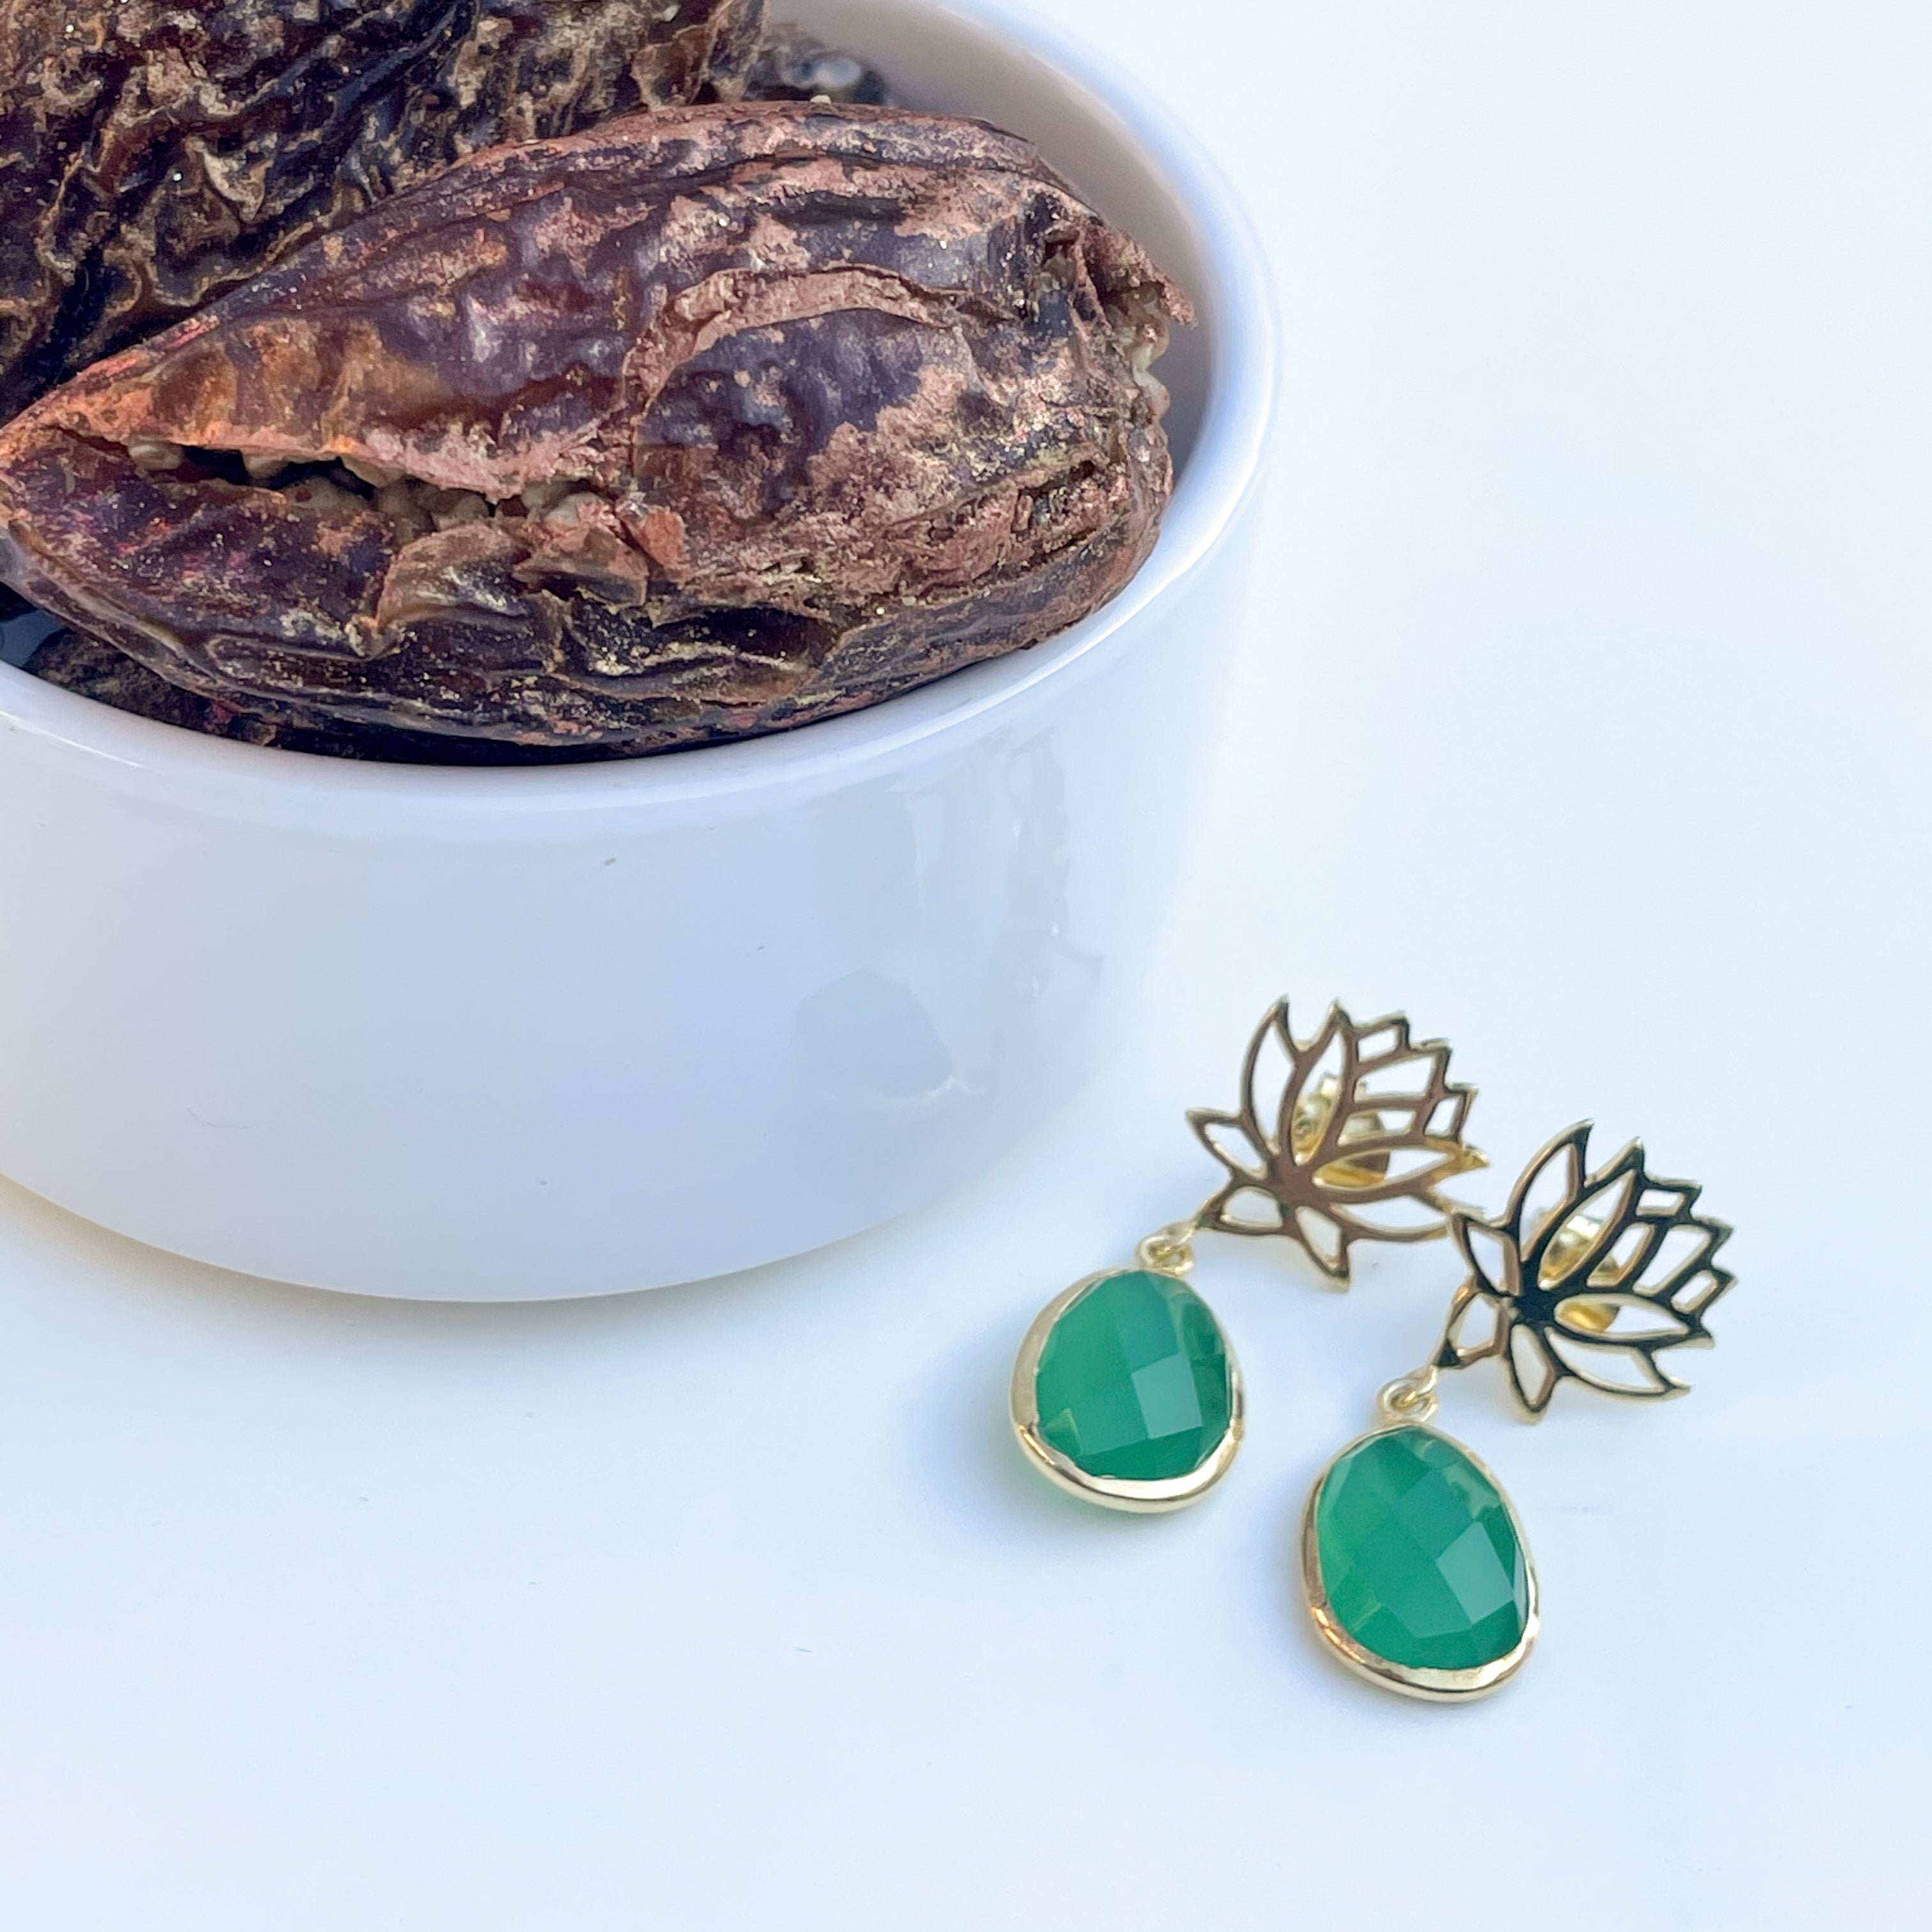 Green Onyx Lotus Earrings in Gold Plated Sterling Silver with a box of 4 Stuffed Medjool Dates